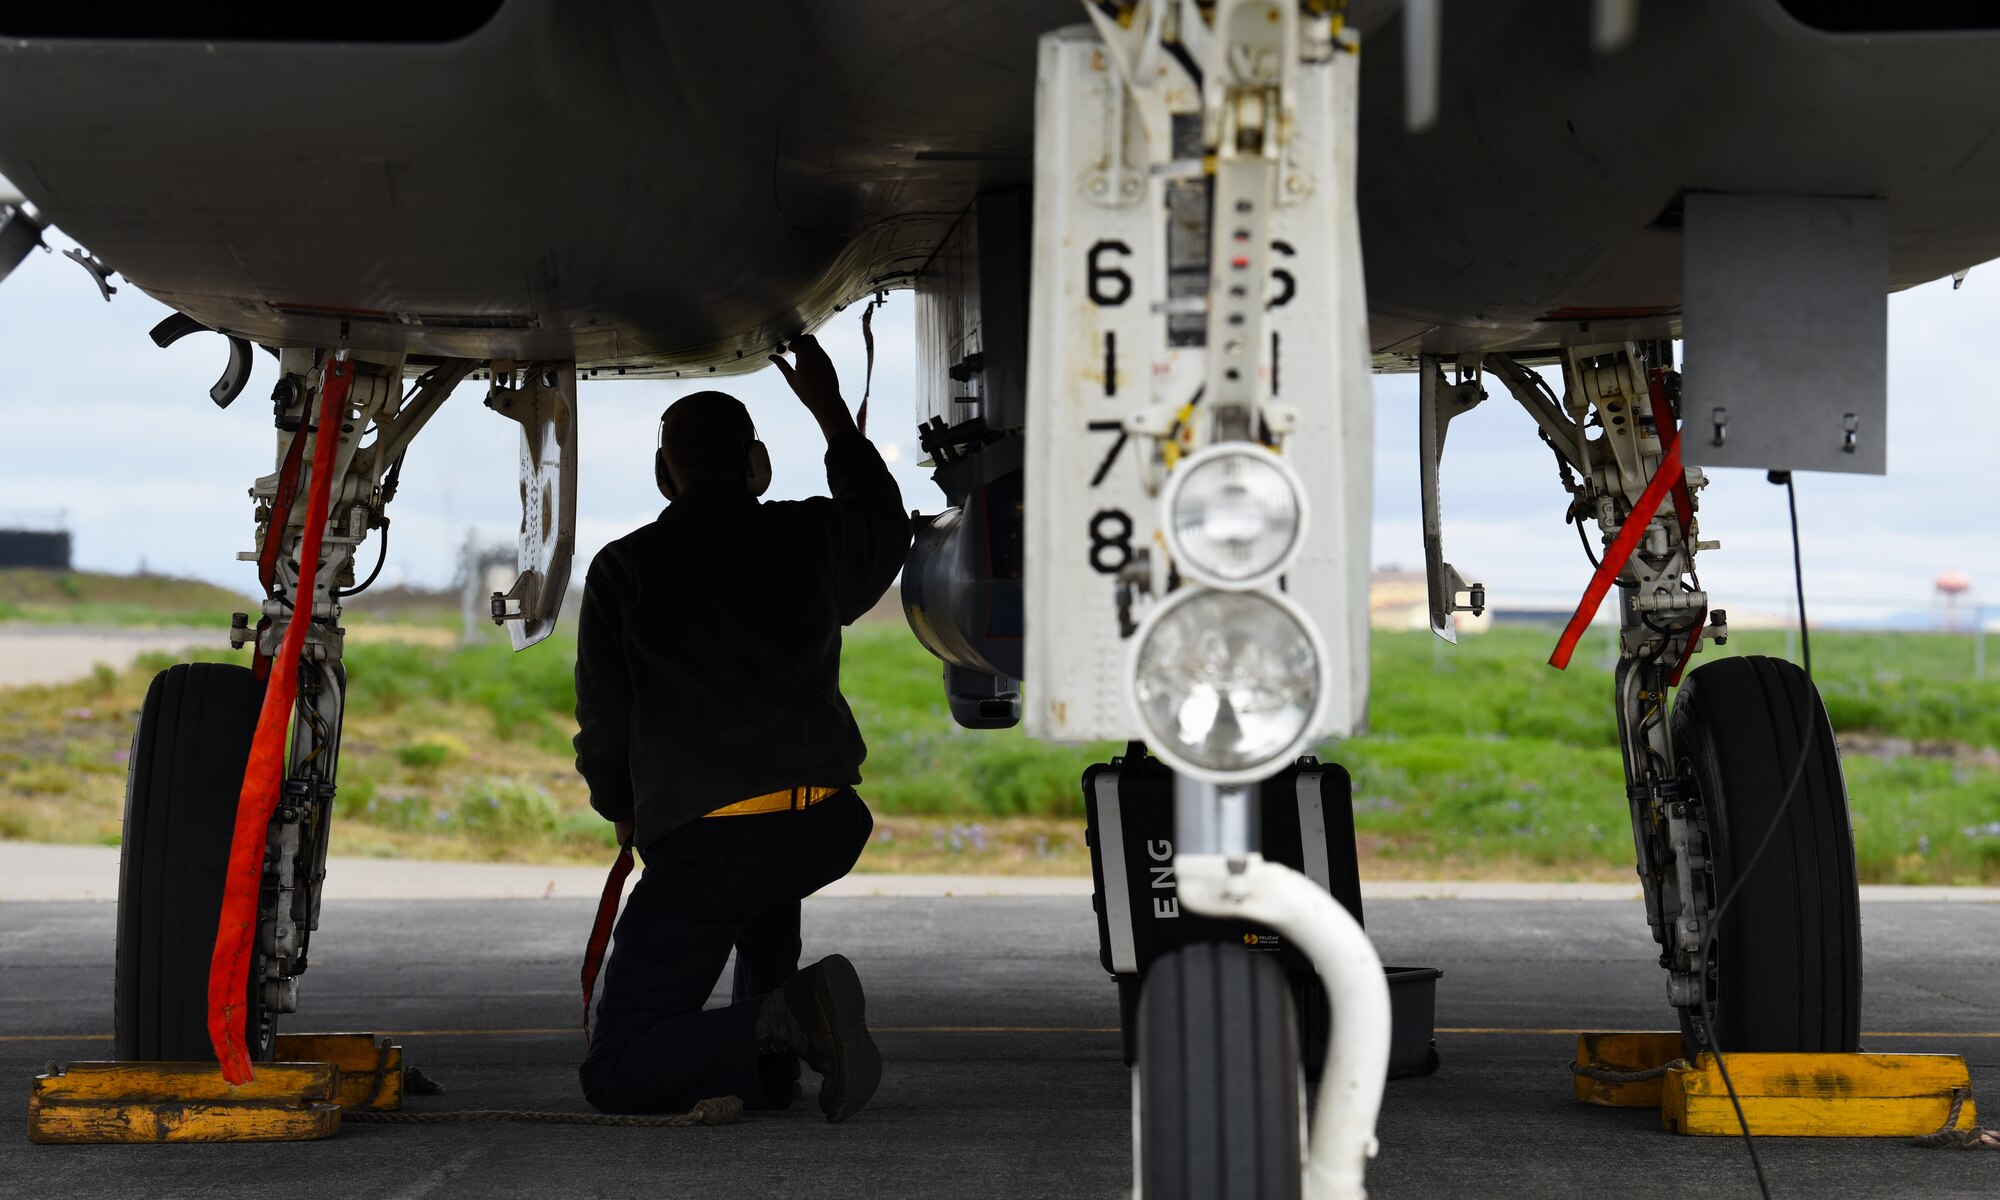 An Airman assigned to the 748th Aircraft Maintenance Squadron inspects an F-15C Eagle post flight at Keflavik Air Base, Iceland, Aug. 2, 2018, in support of NATO’s Icelandic Air Surveillance mission. Deployed from Royal Air Force Lakenheath, England, more than 150 maintainers from the 748th AMXS are facilitating the peacetime preparedness needs and bolstering the security and defense of Iceland. (U.S. Air Force photo/Staff Sgt. Alex Fox Echols III) (U.S. Air Force photo/Staff Sgt. Alex Fox Echols III)